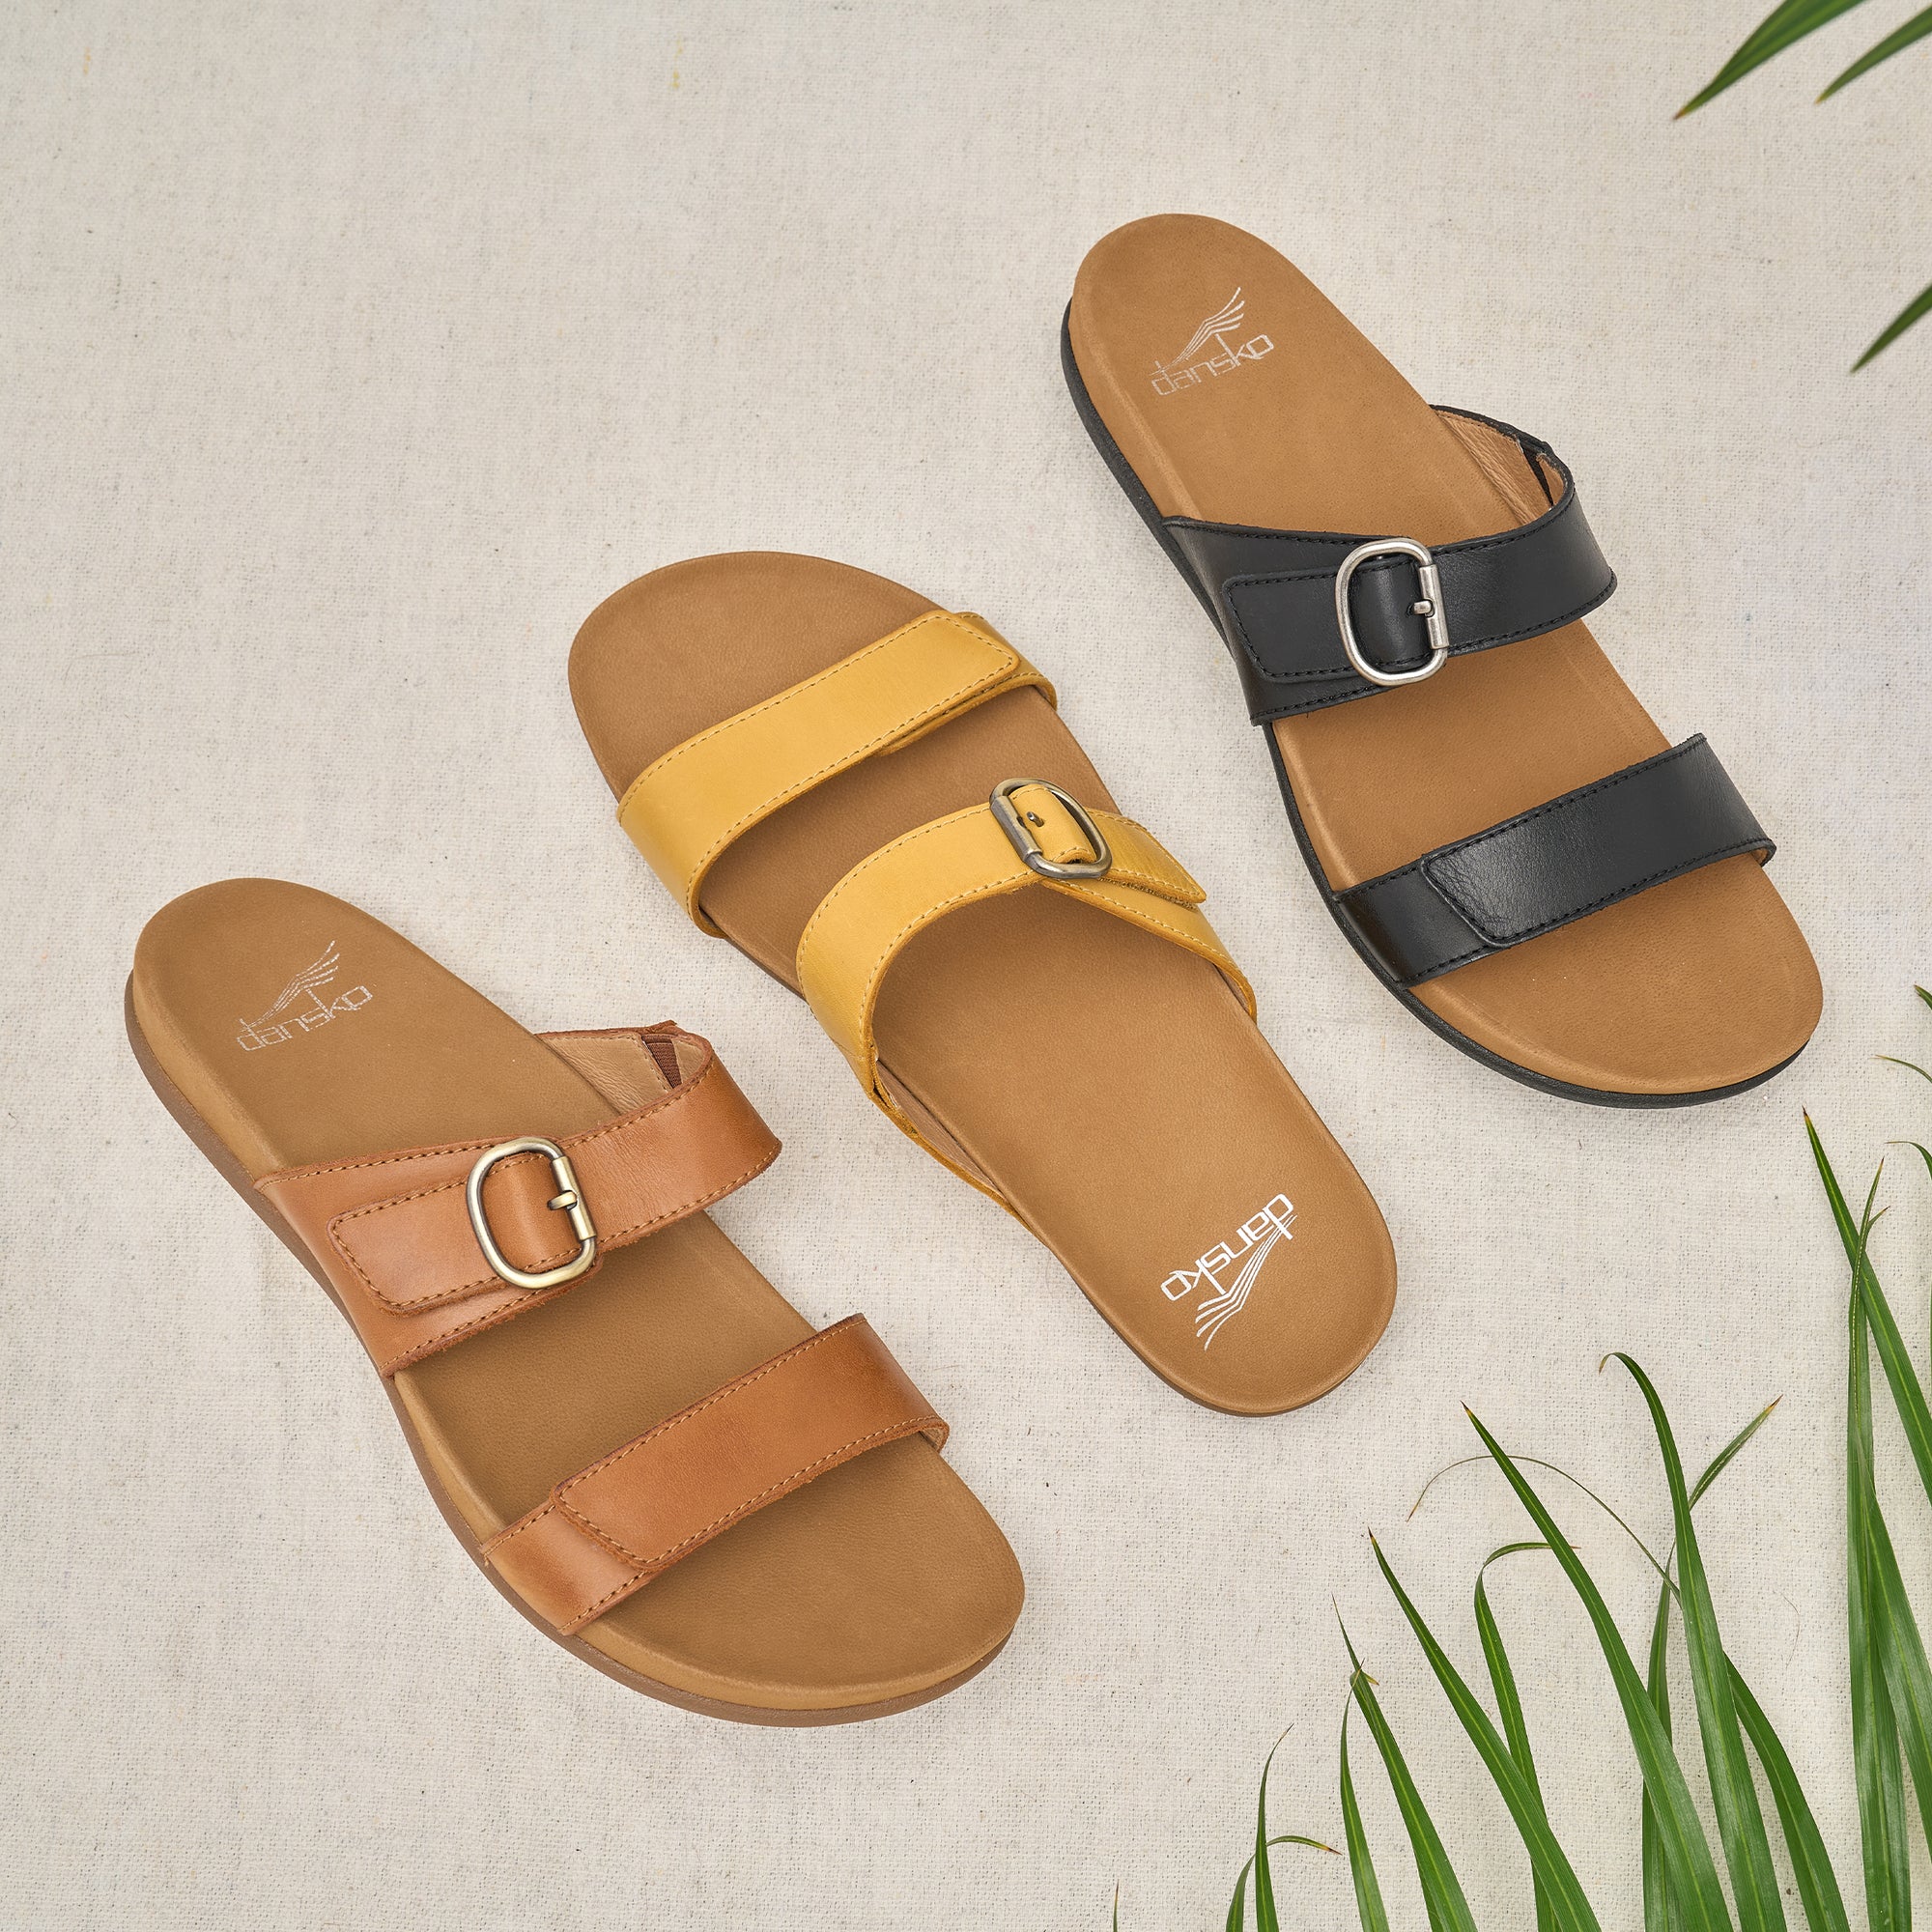 Three color options of a slide sandal with leather uppers and a contoured footbed.